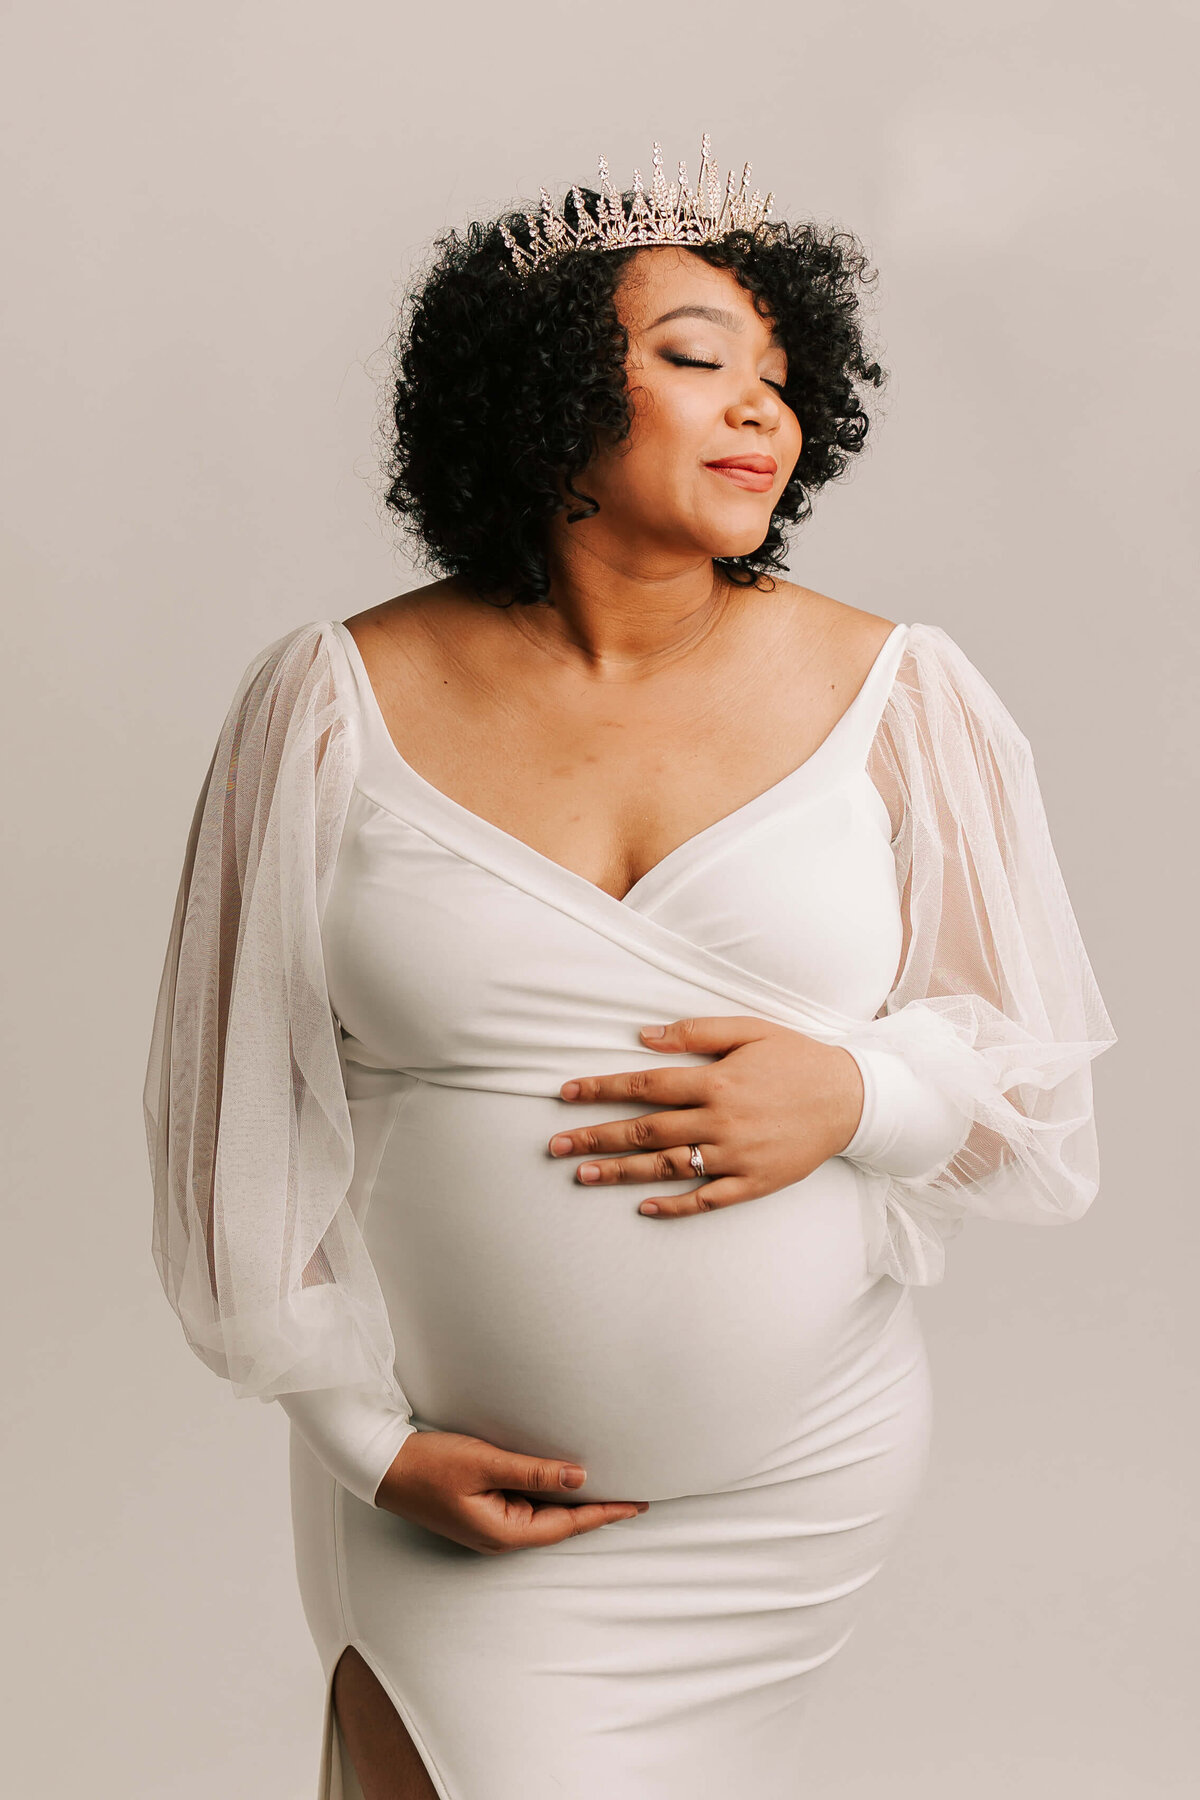 mom wearing crown wearing white dress smiling with eyes closed for maternity portrait